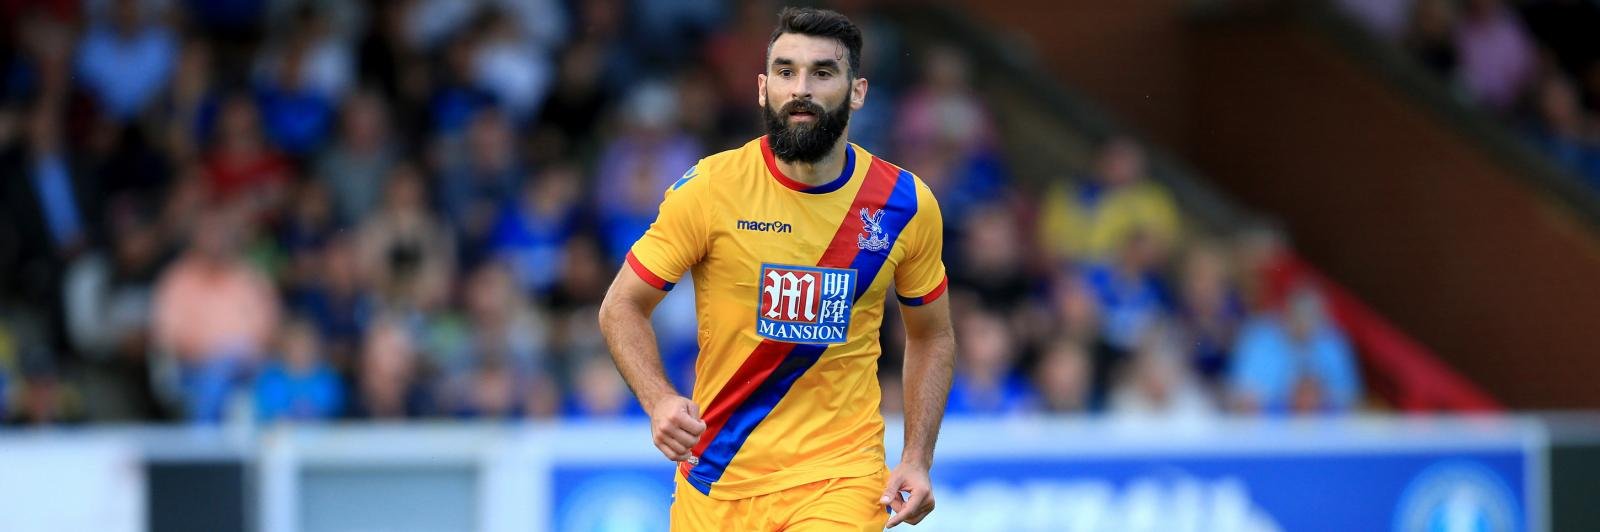 My memorable moments of Crystal Palace’s Mile Jedinak